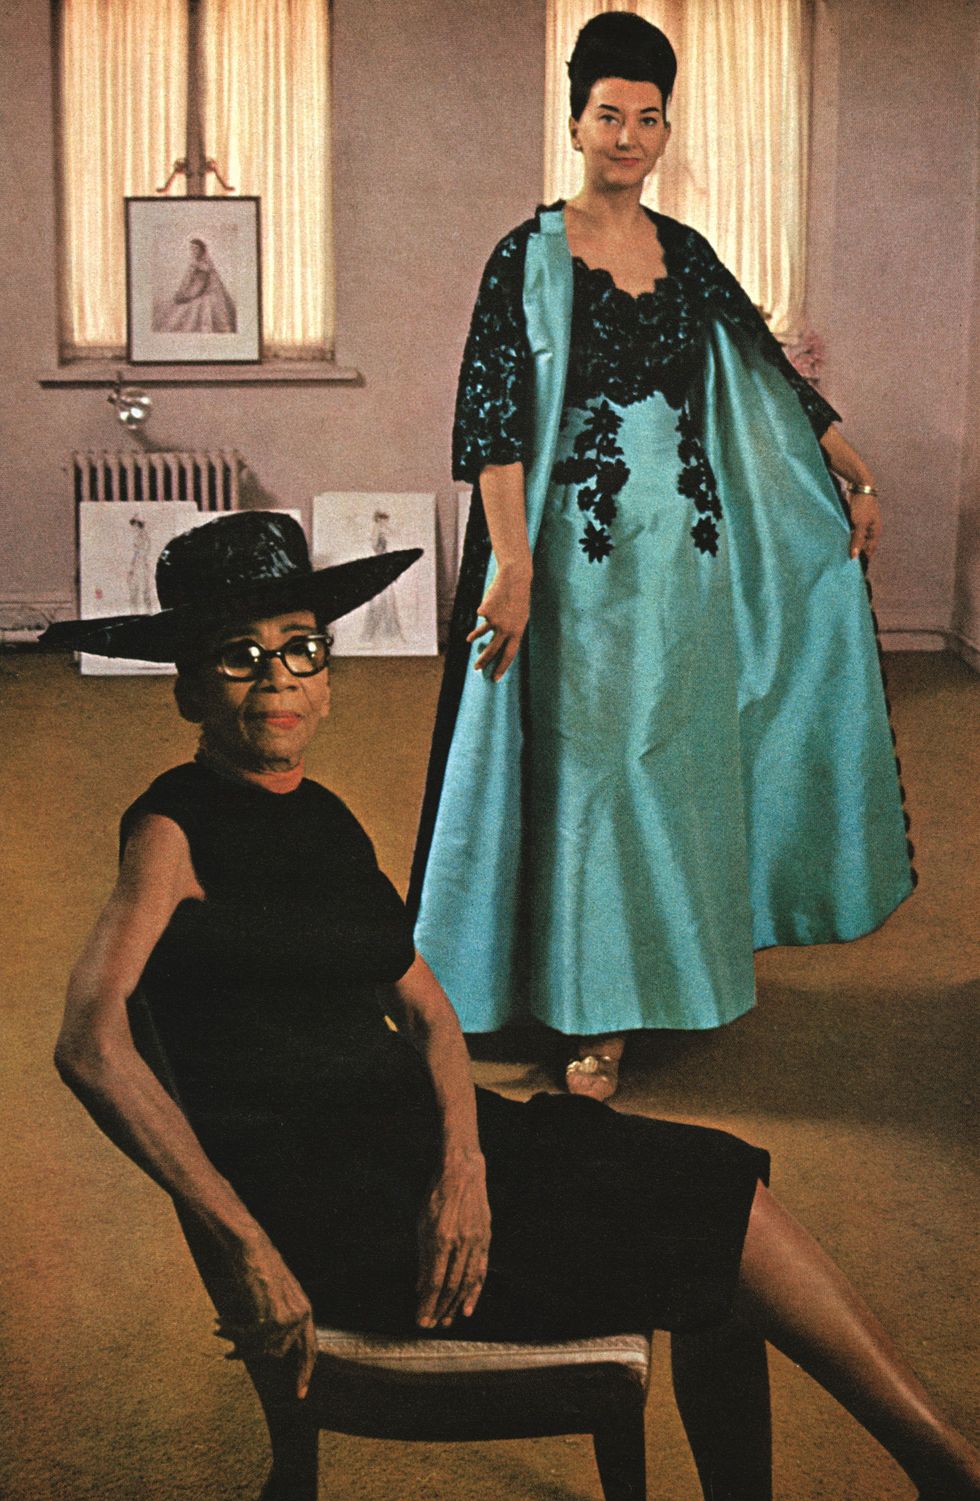 doyen of fashion designers, Ann Lowe of New York, who has been creating beautiful dresses and handmade flowers since the age of six. She is pictured with London model Judith Palmer, wearing a dress Lowe theater dress and an Italian mecado silk coat, with black lace re-embroidered in black soutache moneta sleet, jrljohnson Publishing Archive